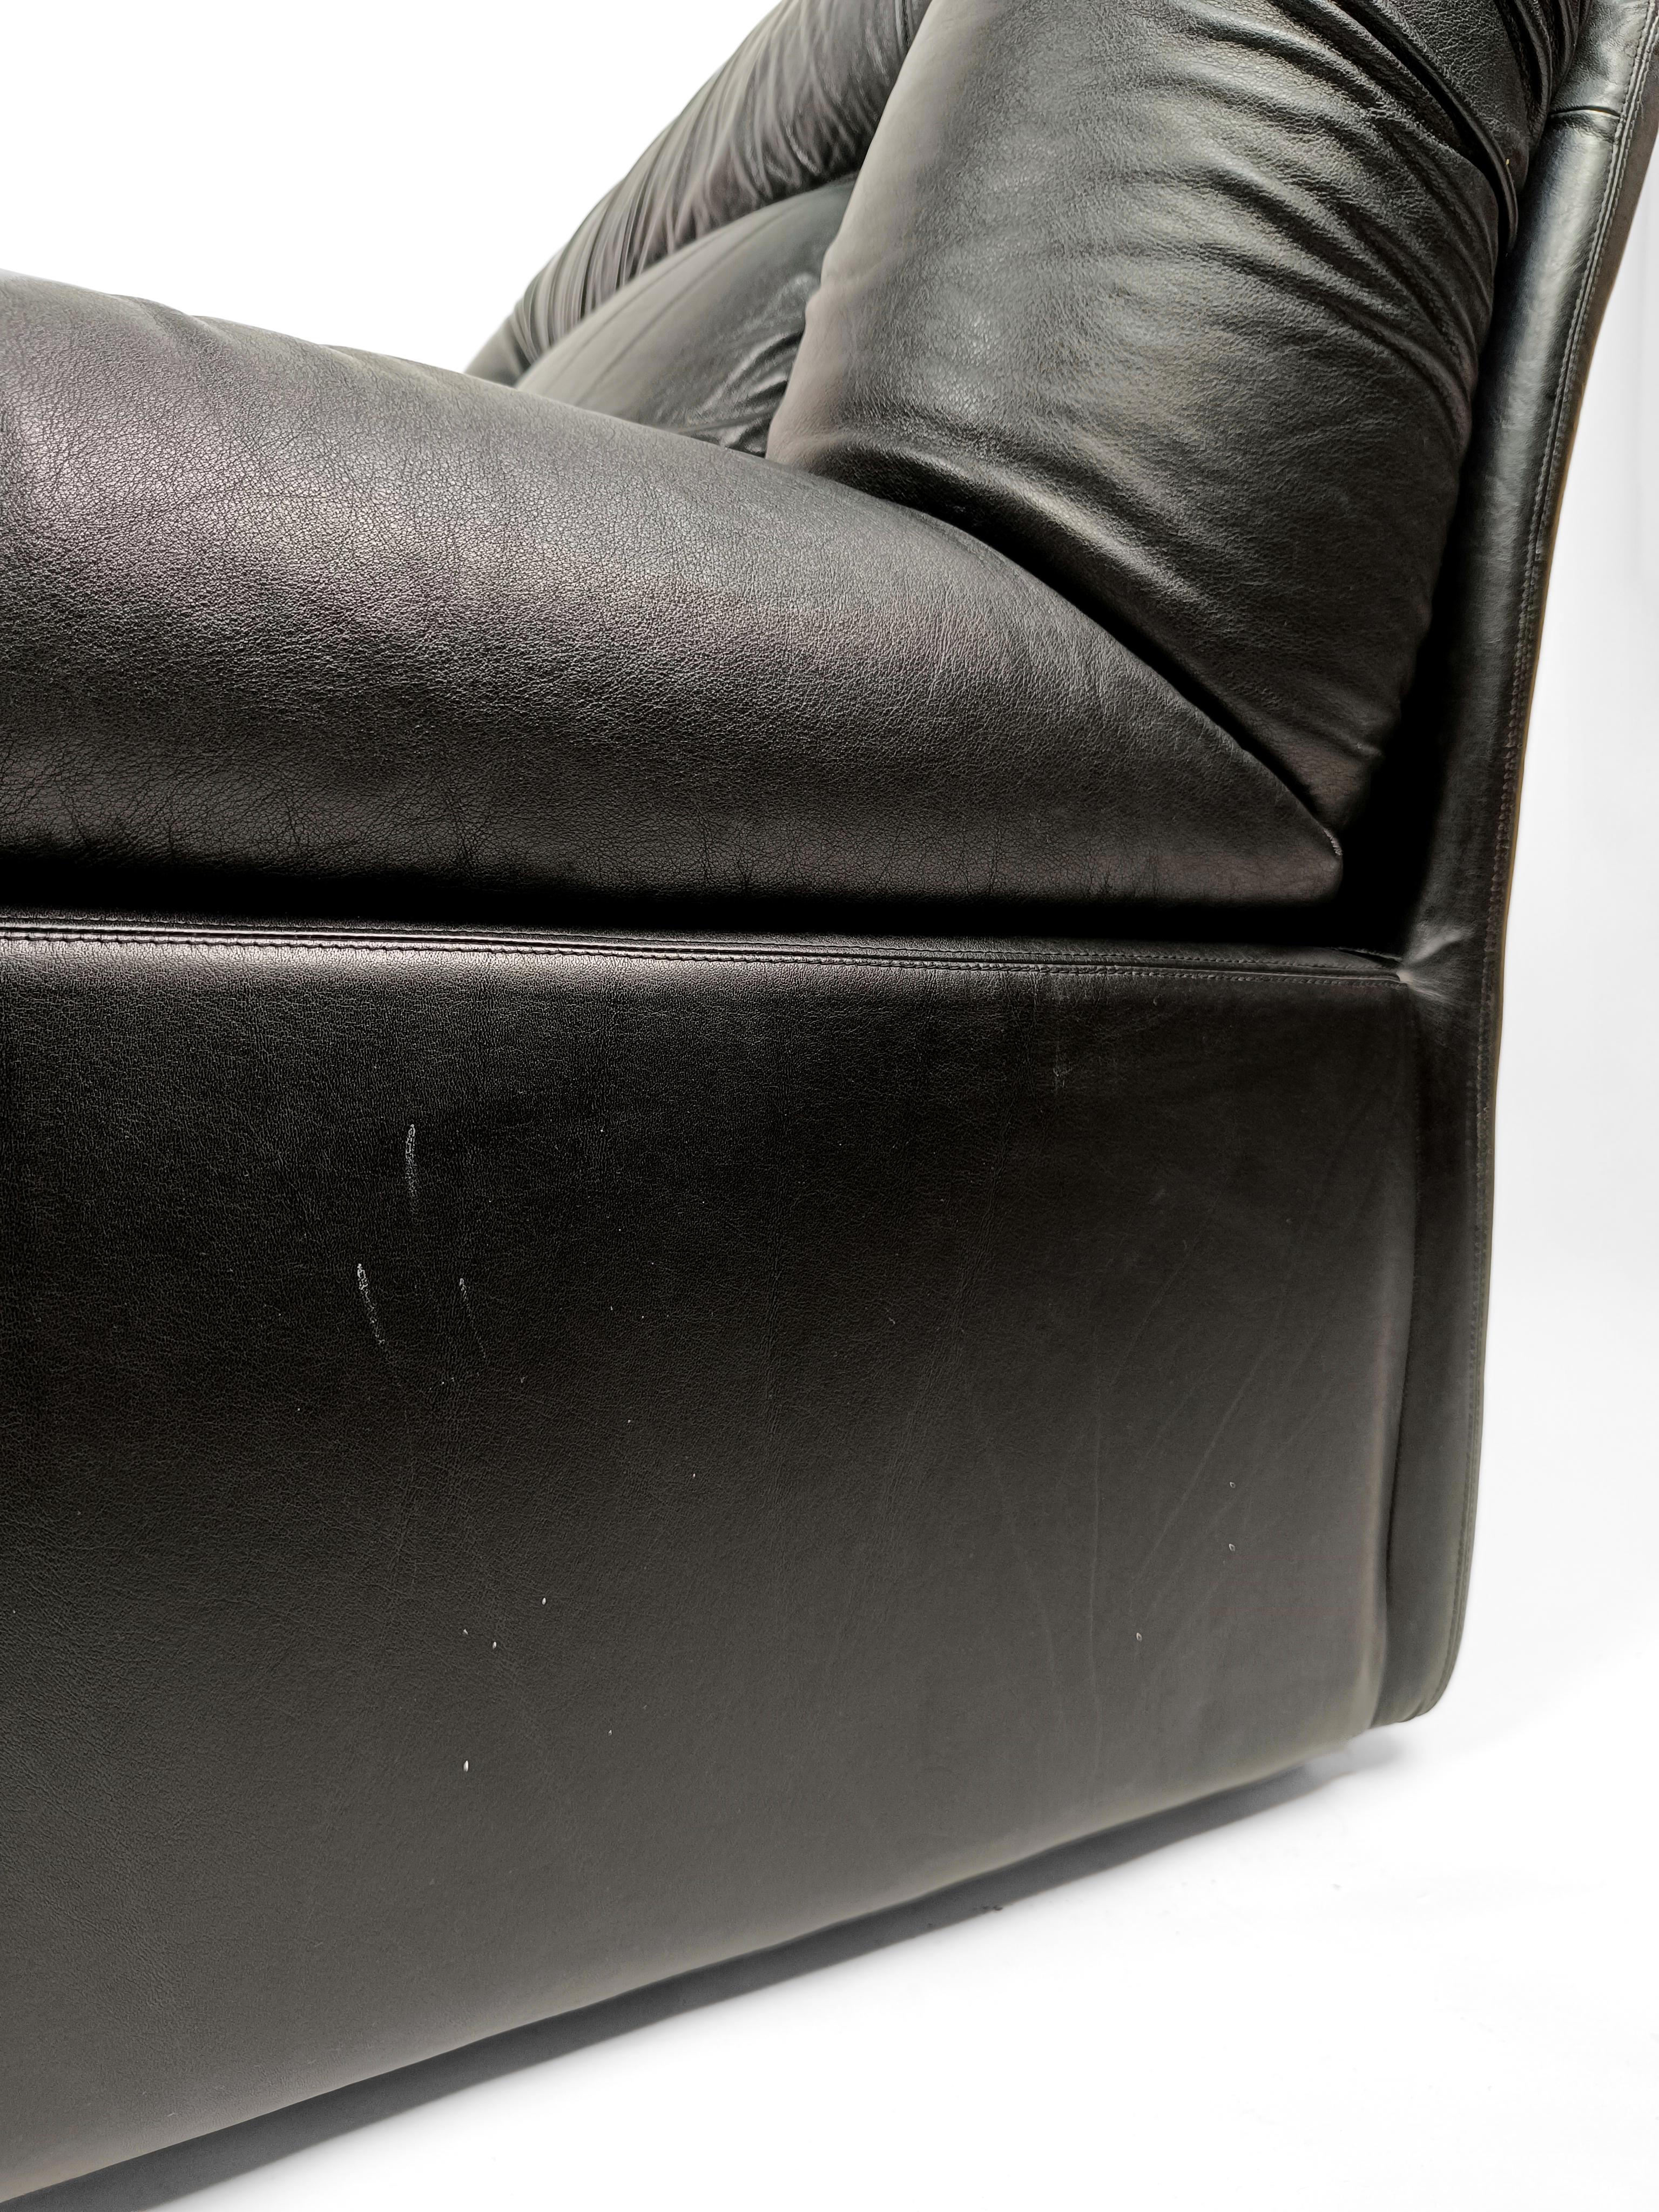 Italian Modular Lounge Chair in Black Leather model PANAREA by Lev & Lev, 1970s  For Sale 11